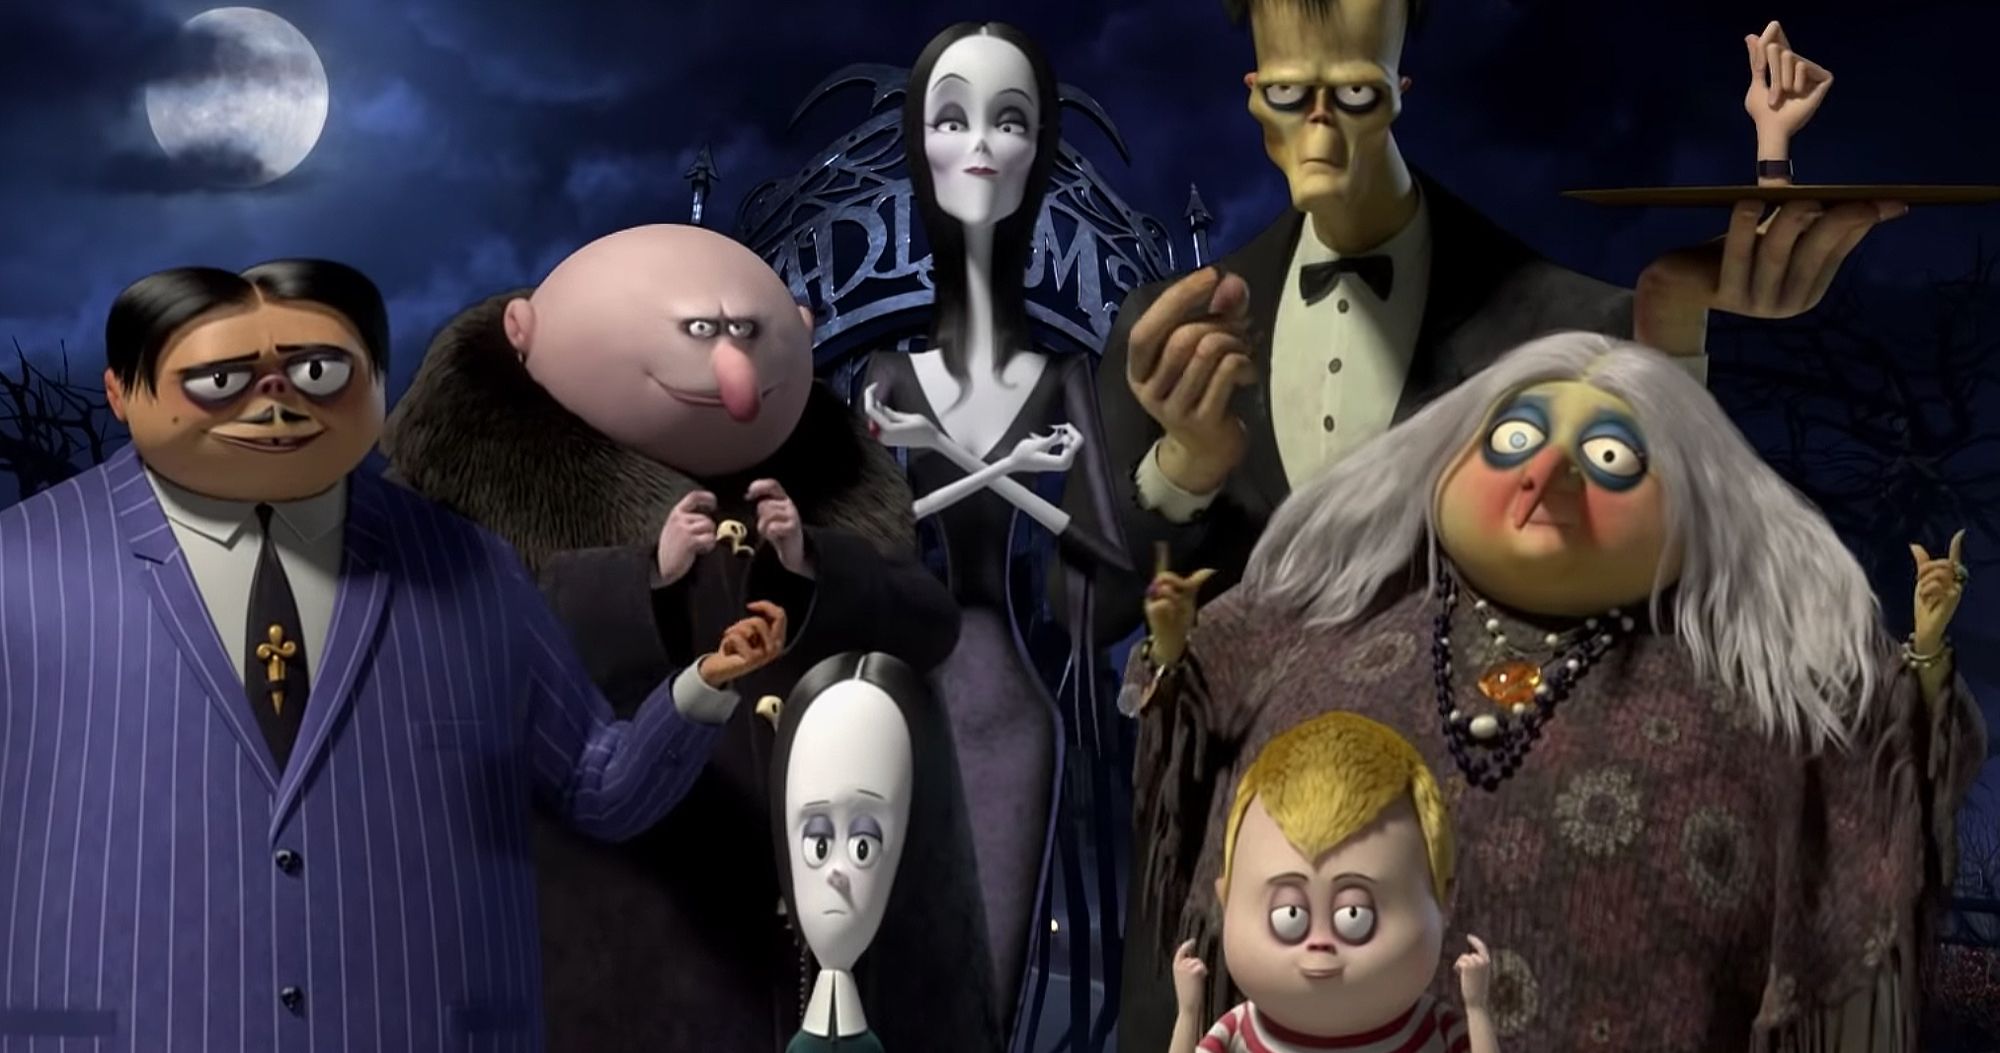 The Addams Family Trailer #2 Brings Halloween's First Family to New Jersey